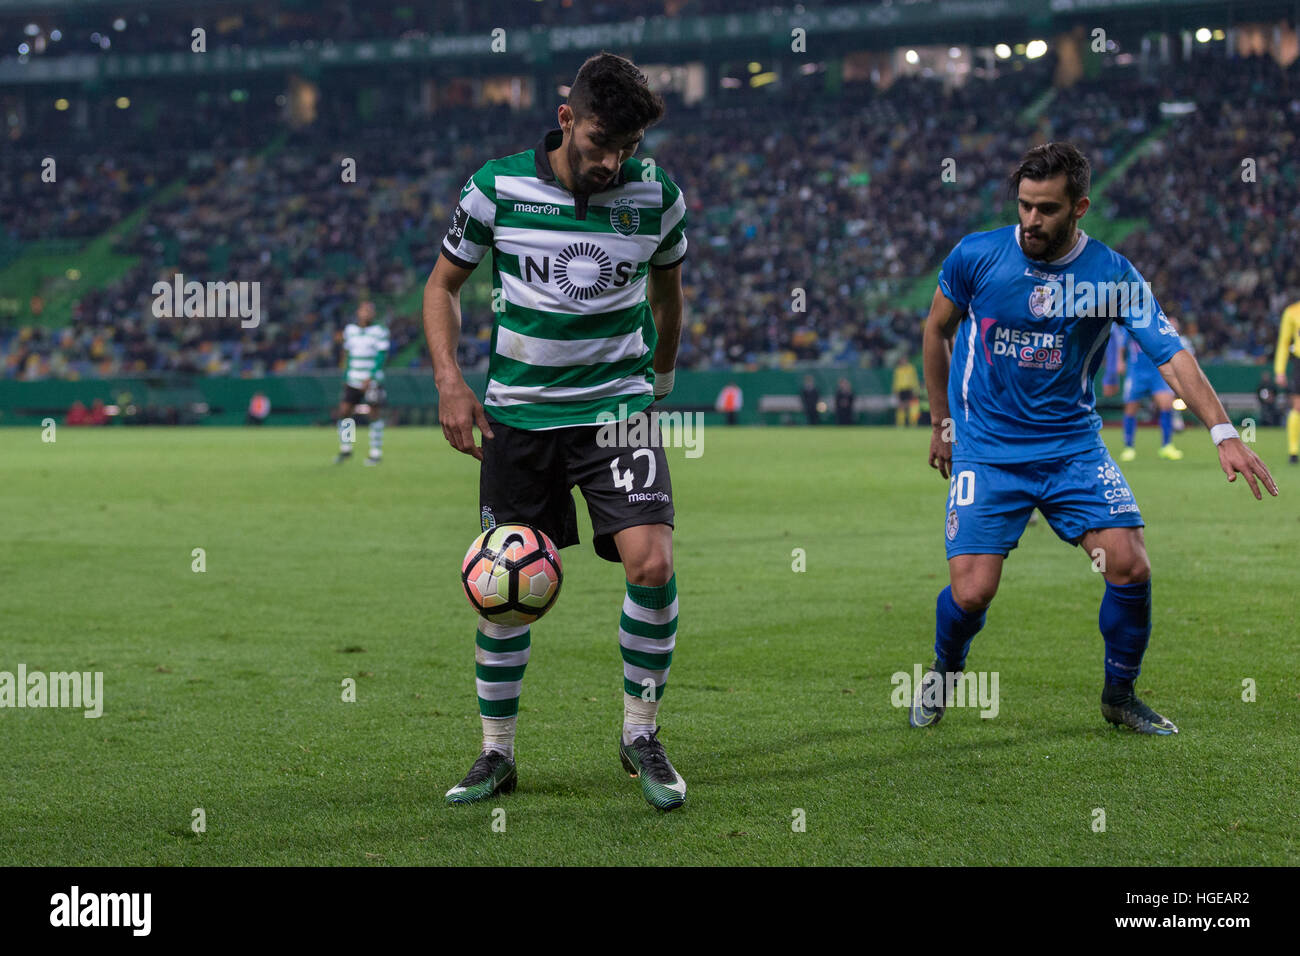 Lisbon, Portugal. 08th Jan, 2017. Sporting's defender from Portugal Ricardo  Esgaio (47) in action during the game Sporting CP vs CD Feirense ©  Alexandre de Sousa/Alamy Live News Stock Photo - Alamy